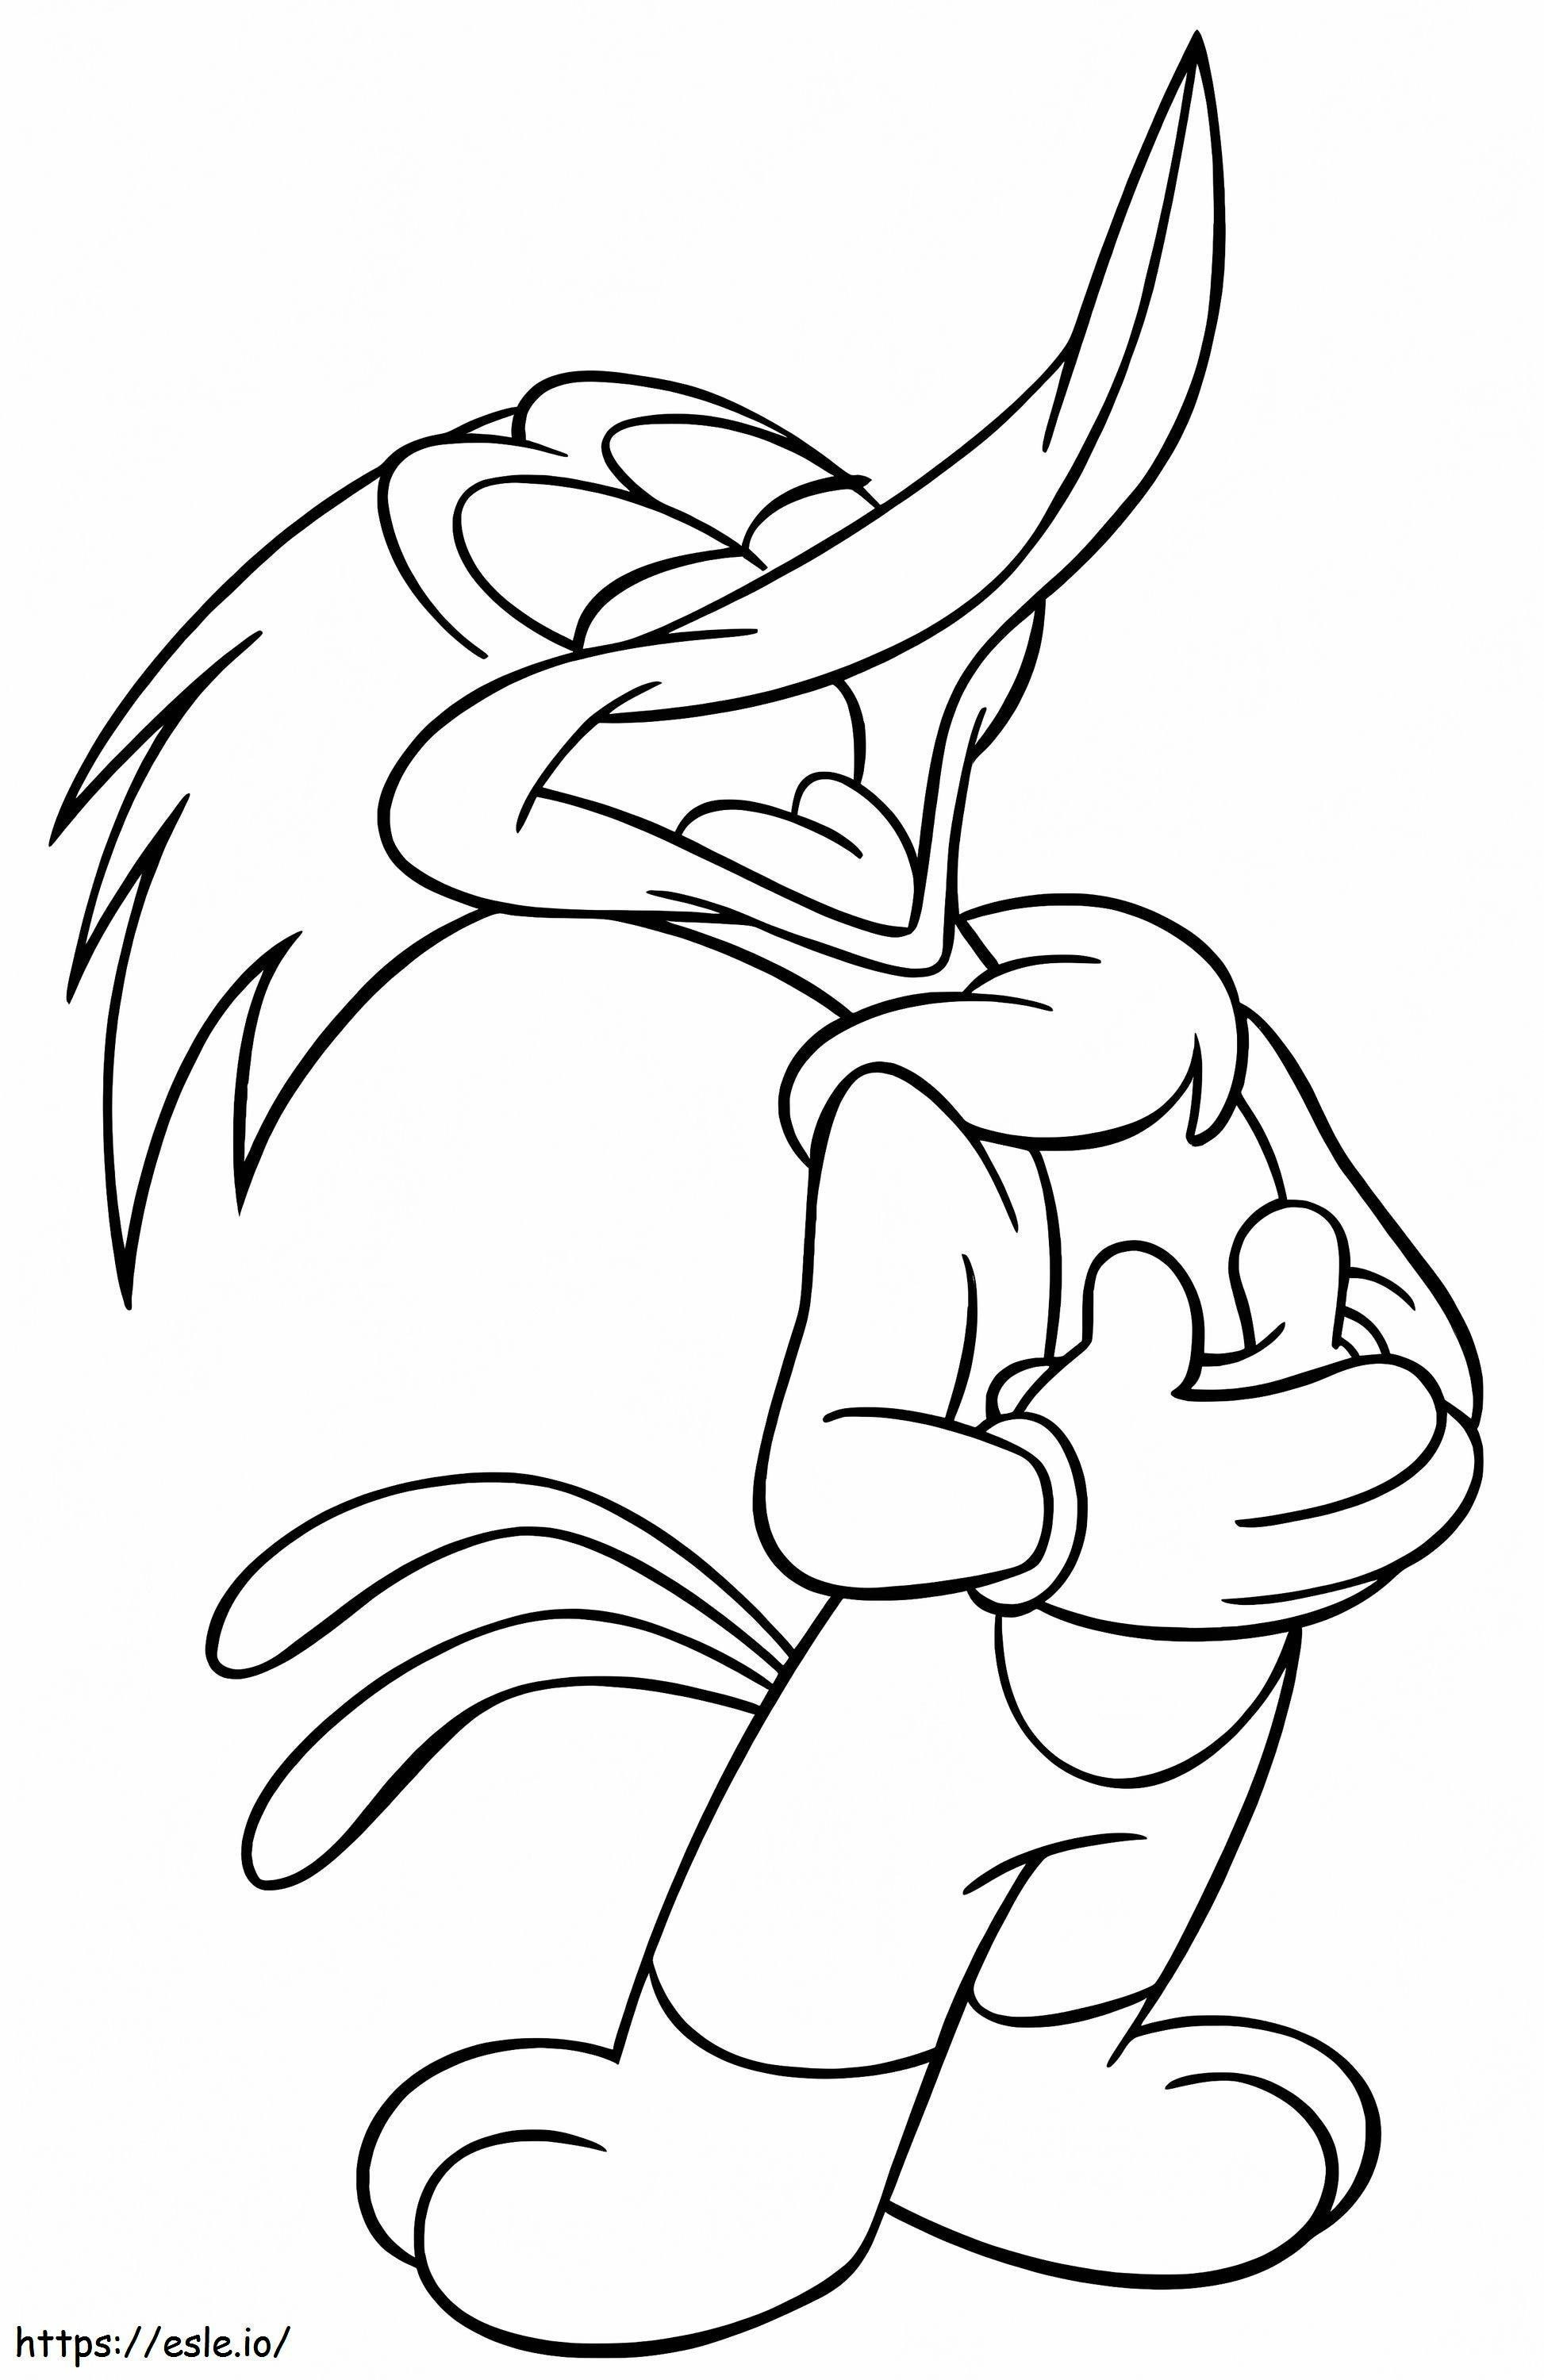 Laughing Woodpecker coloring page